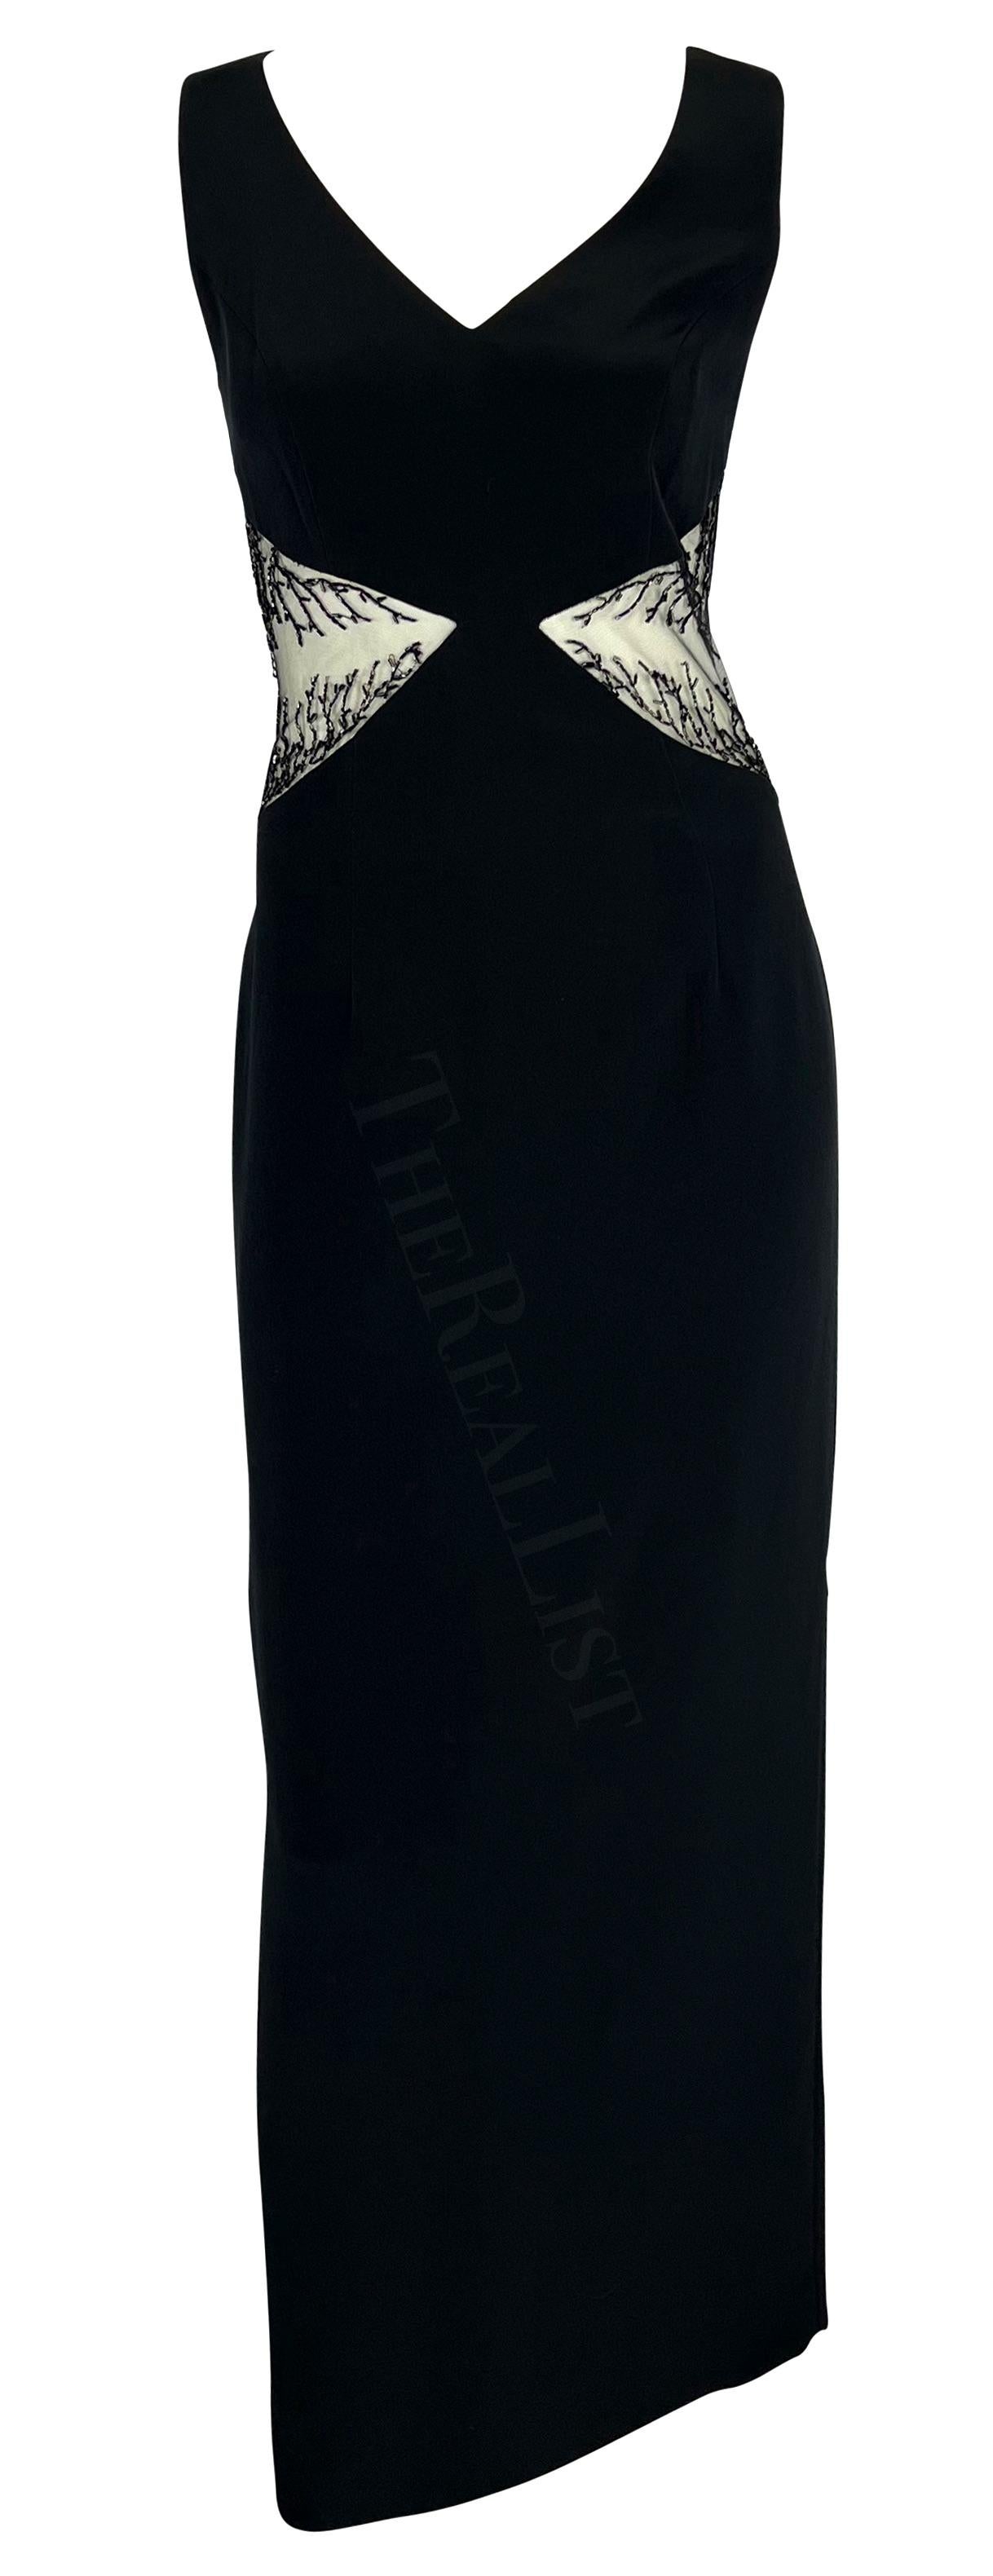 Presenting a chic black beaded Bob Mackie sleeveless gown. From the 1990s, this sexy floor-length dress features a v-neckline, column cut, and is made complete with sheer-covered cut-outs on either side of the waist. The cutouts are adorned with